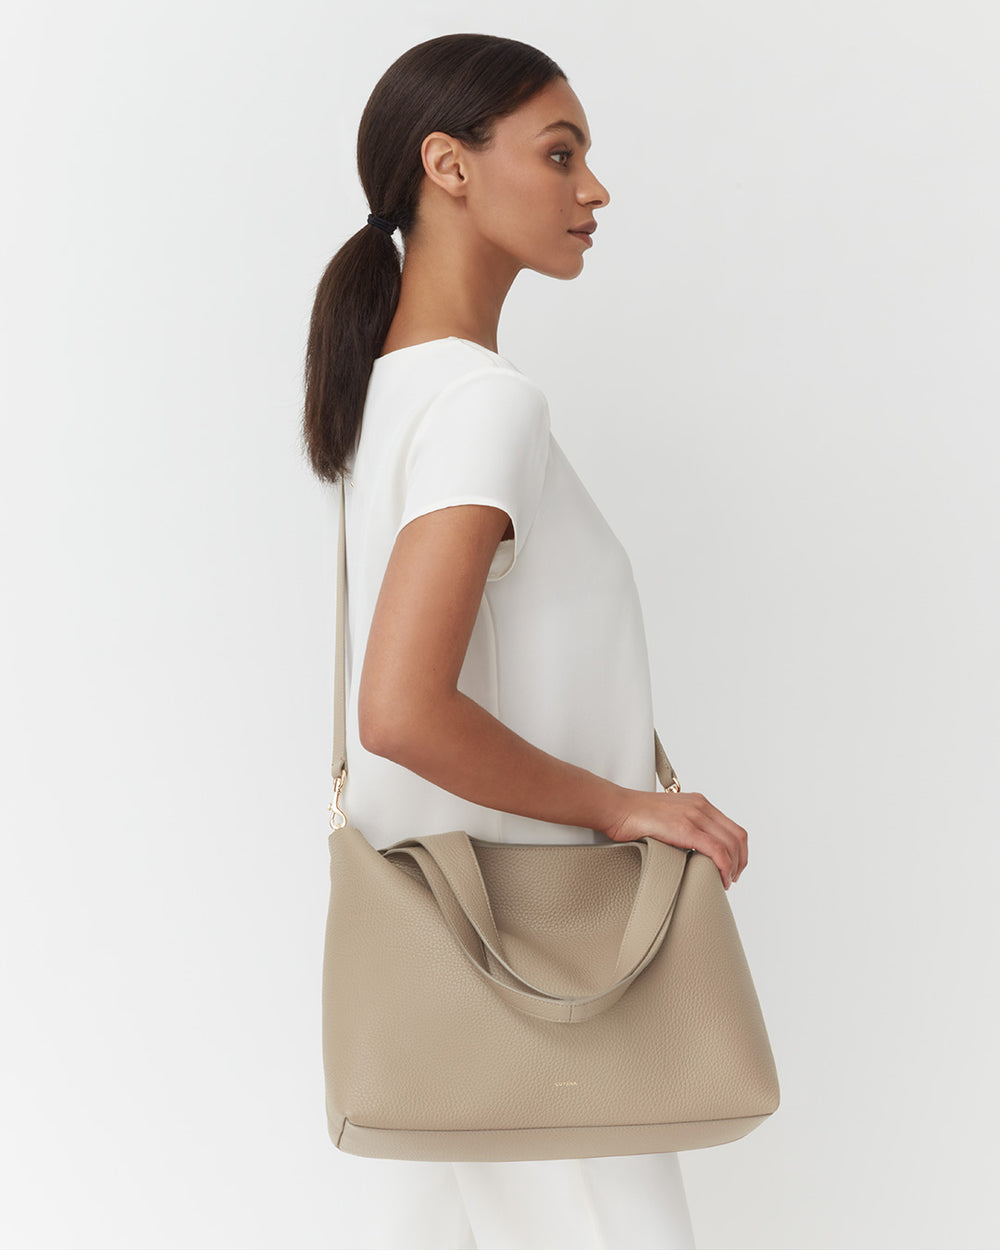 Woman in a top carrying a large shoulder bag, profile view